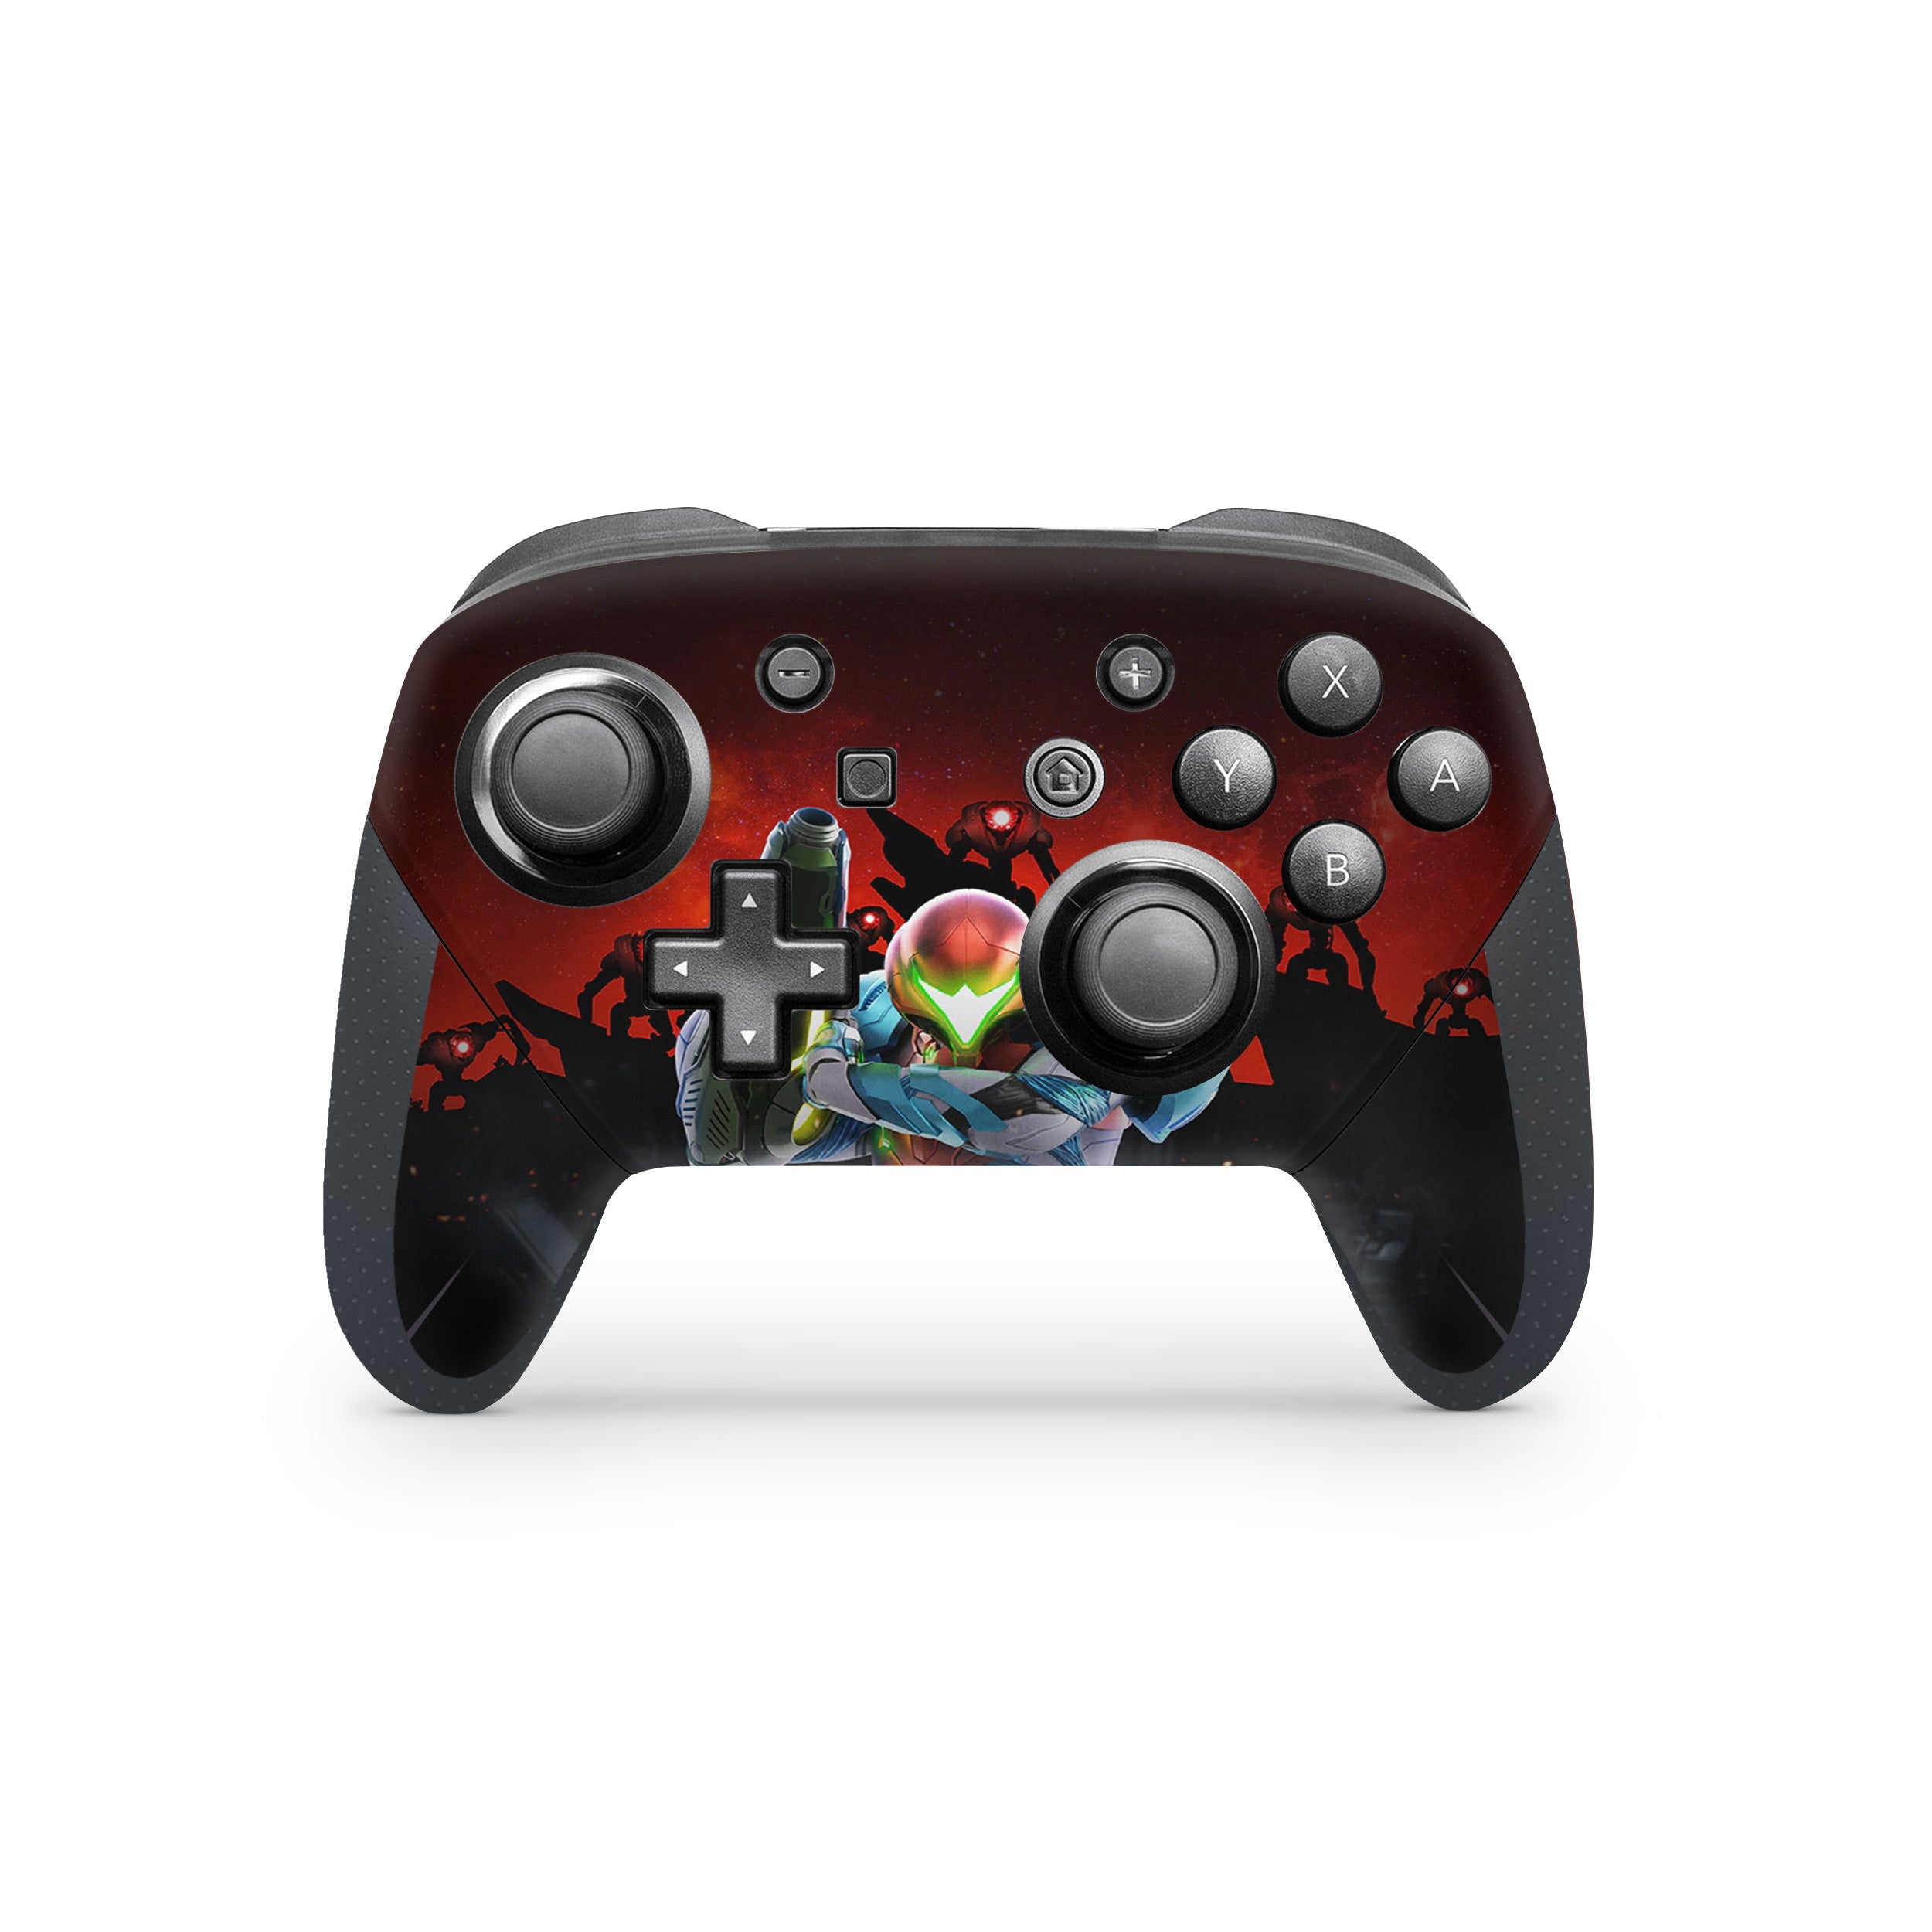 A video game skin featuring a Metroid Dread design for the Switch Pro Controller.